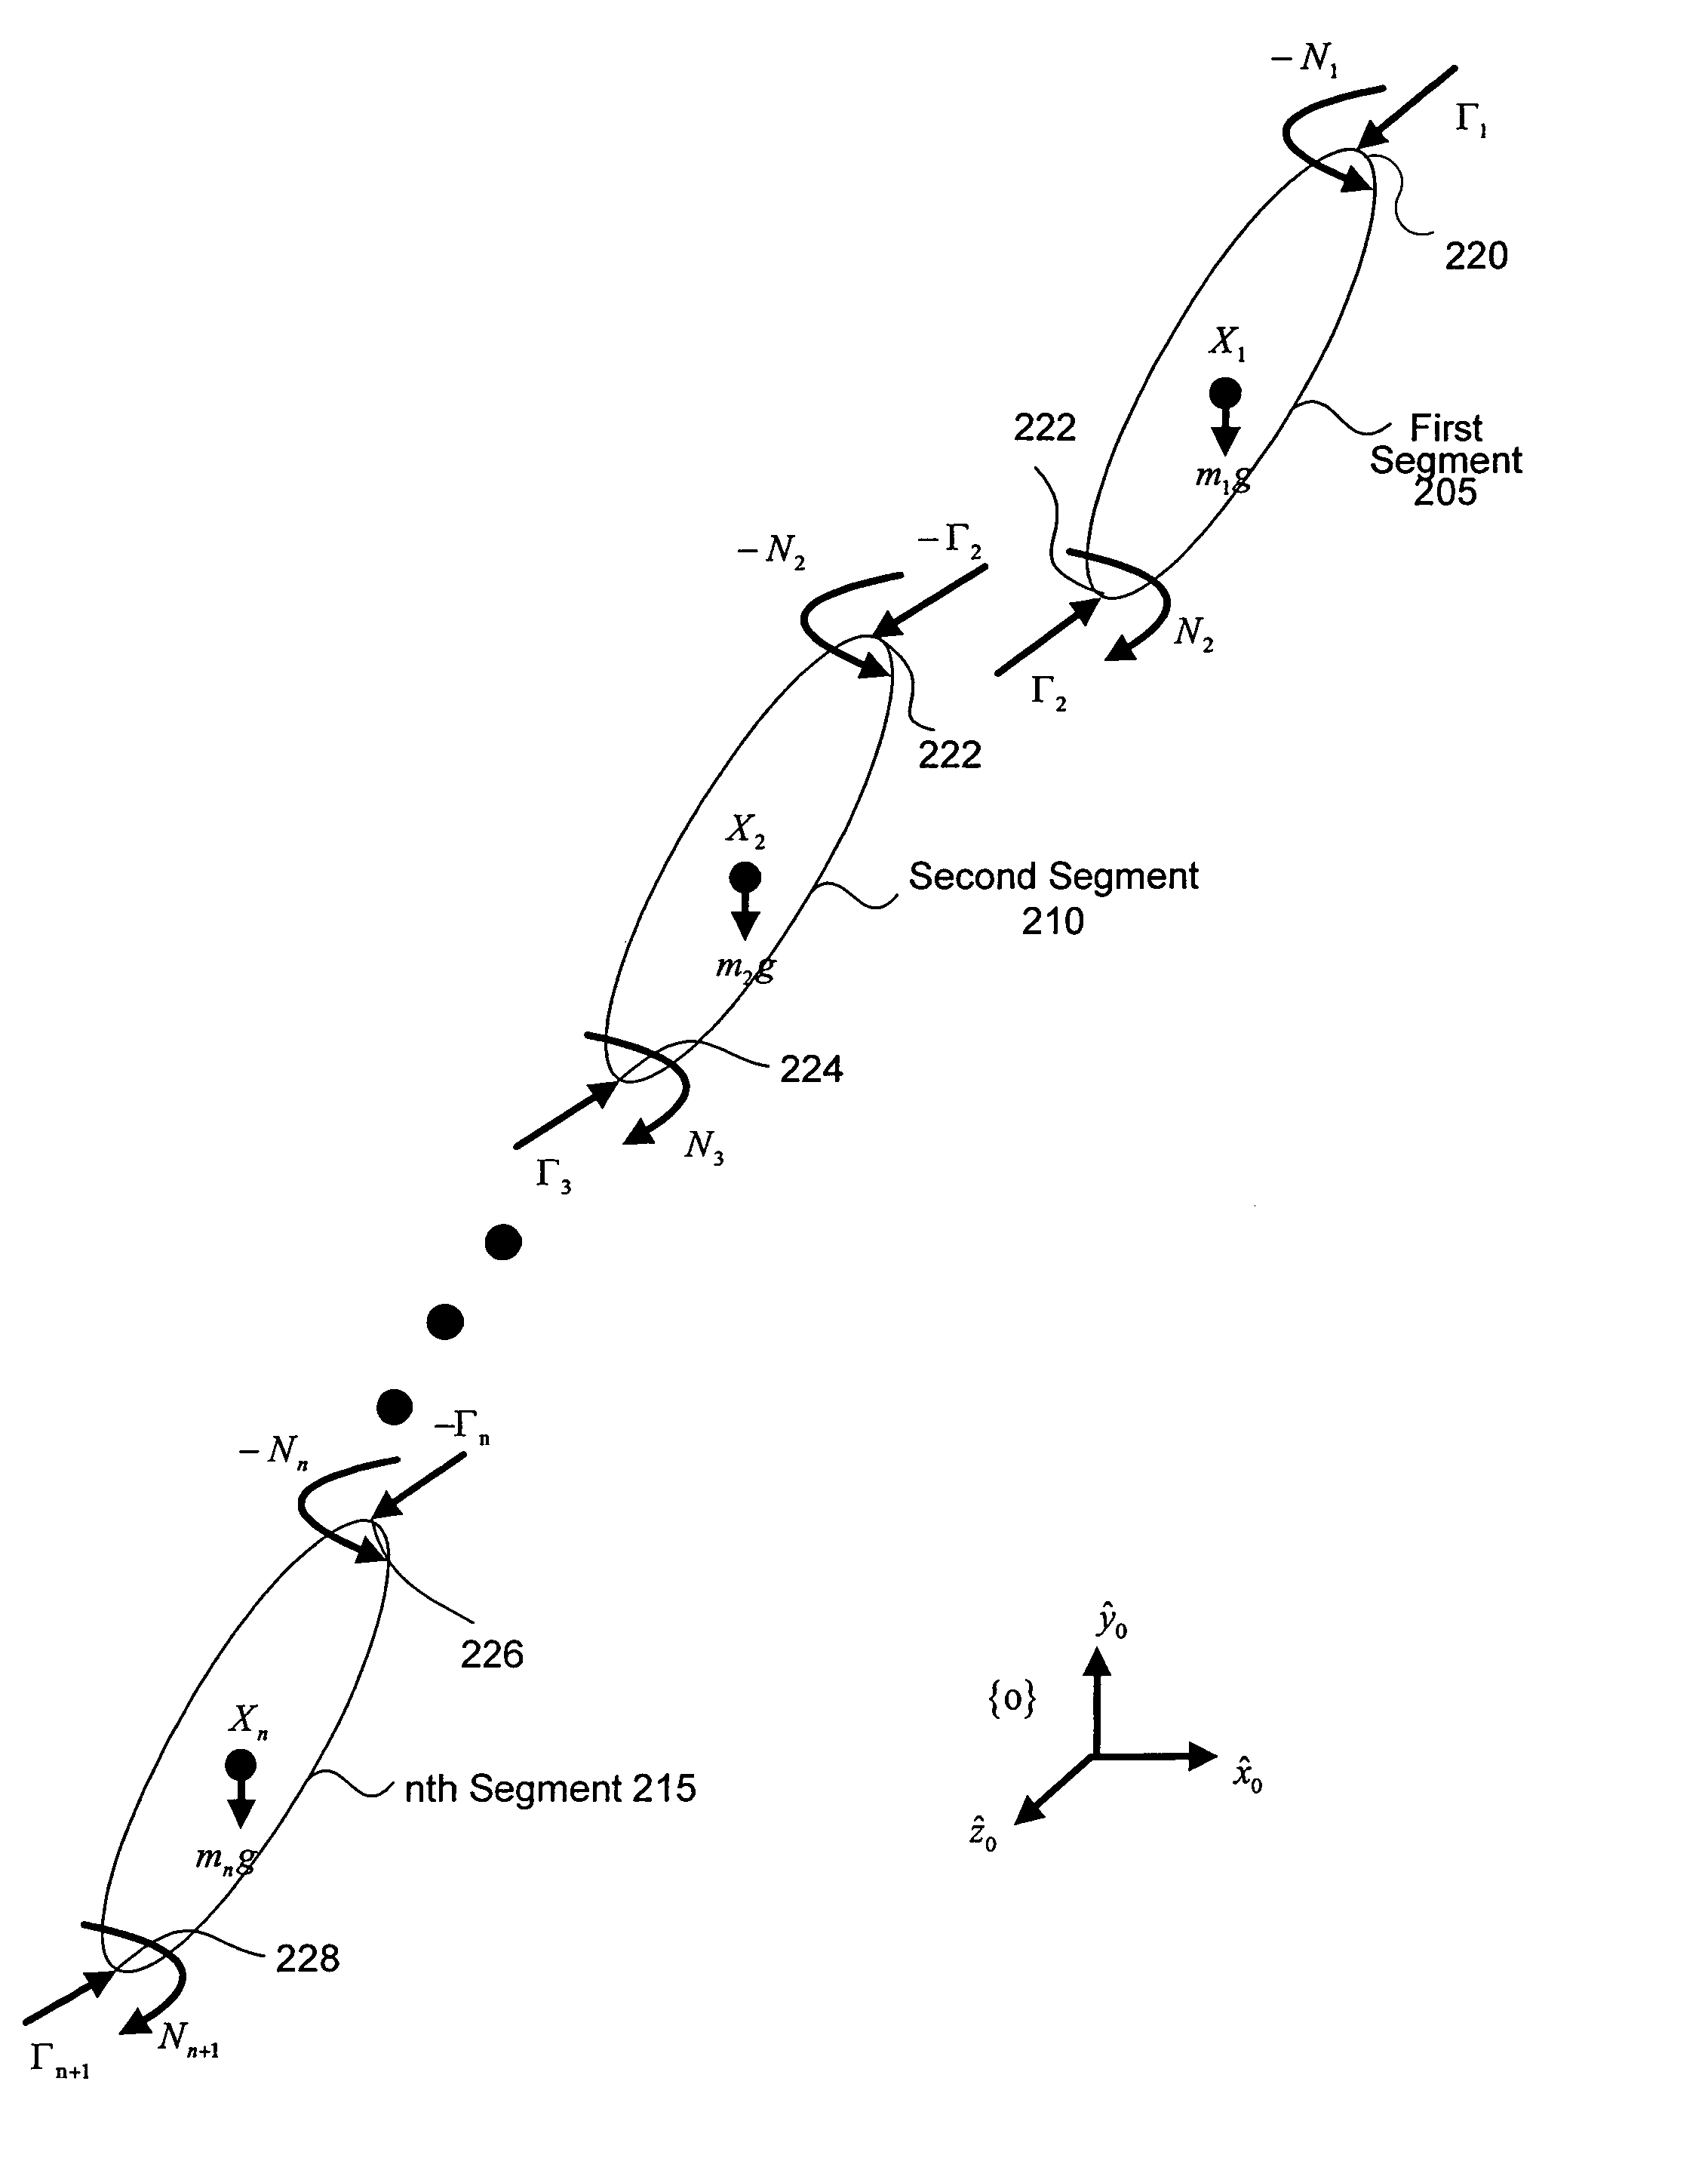 System and method of estimating joint loads using an approach of closed form dynamics